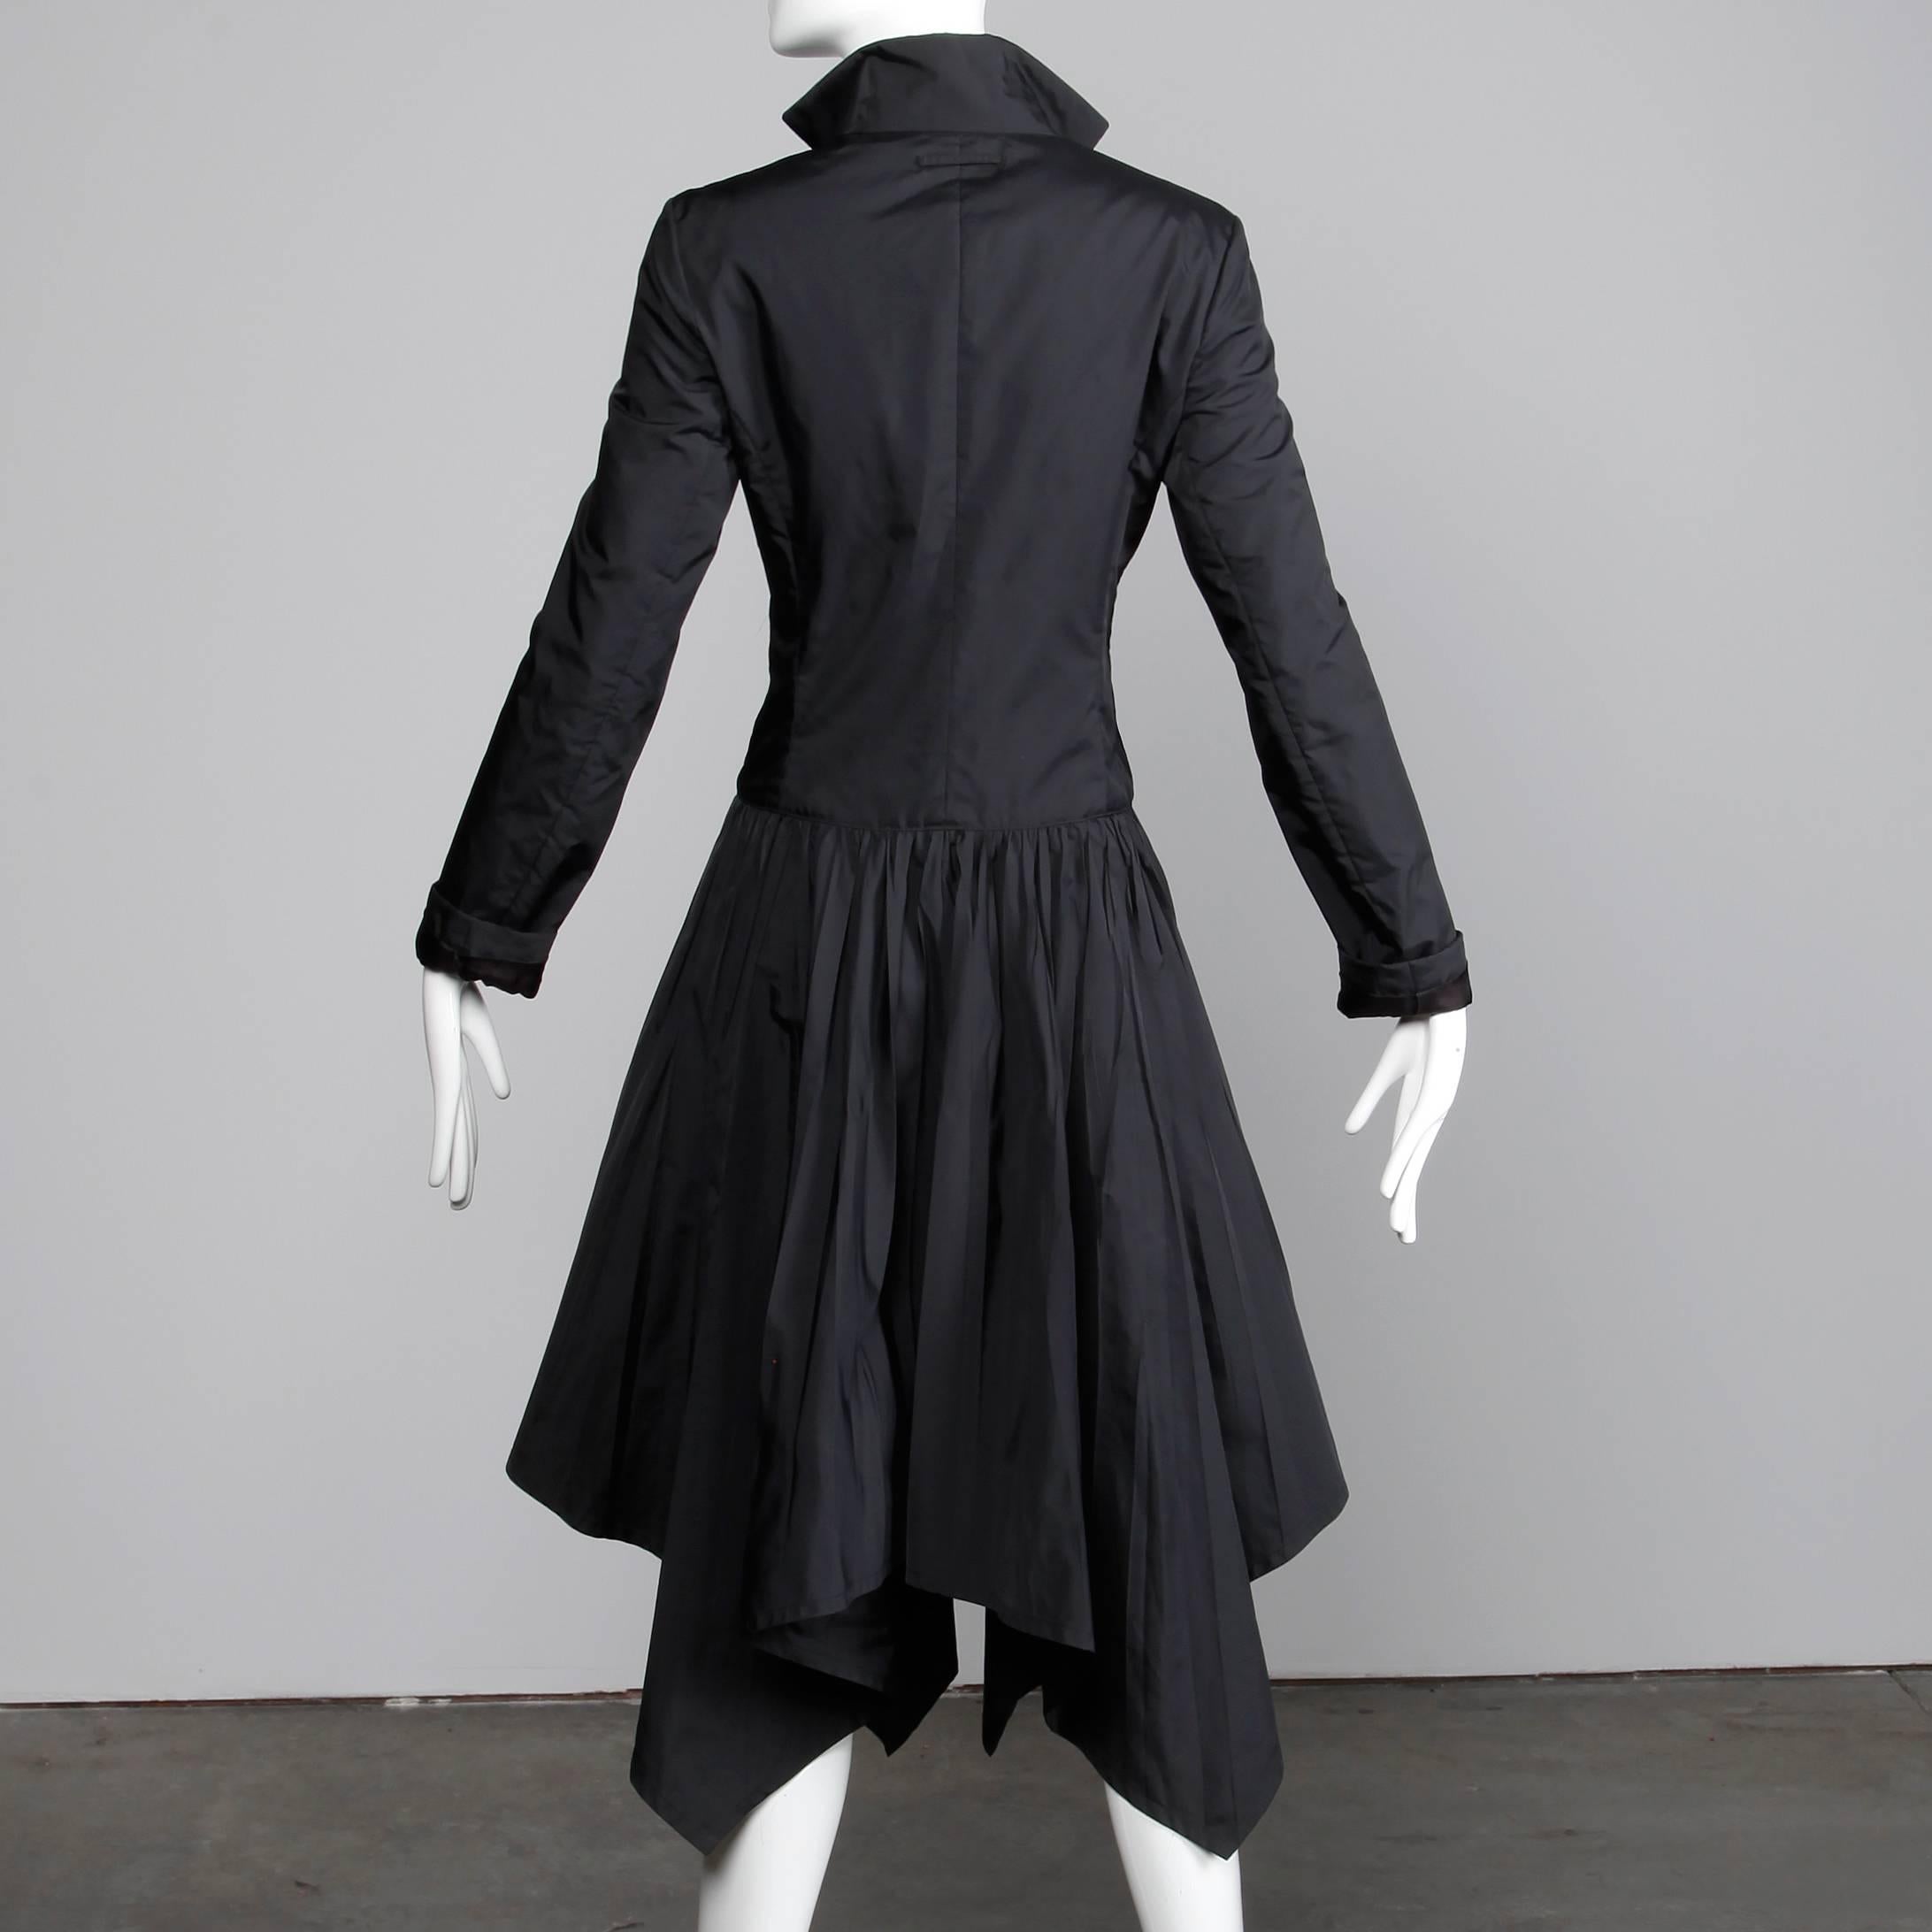 Jean Paul Gaultier Vintage Black Avant Garde Steampunk Coat or Dress, 1990s  In Excellent Condition For Sale In Sparks, NV